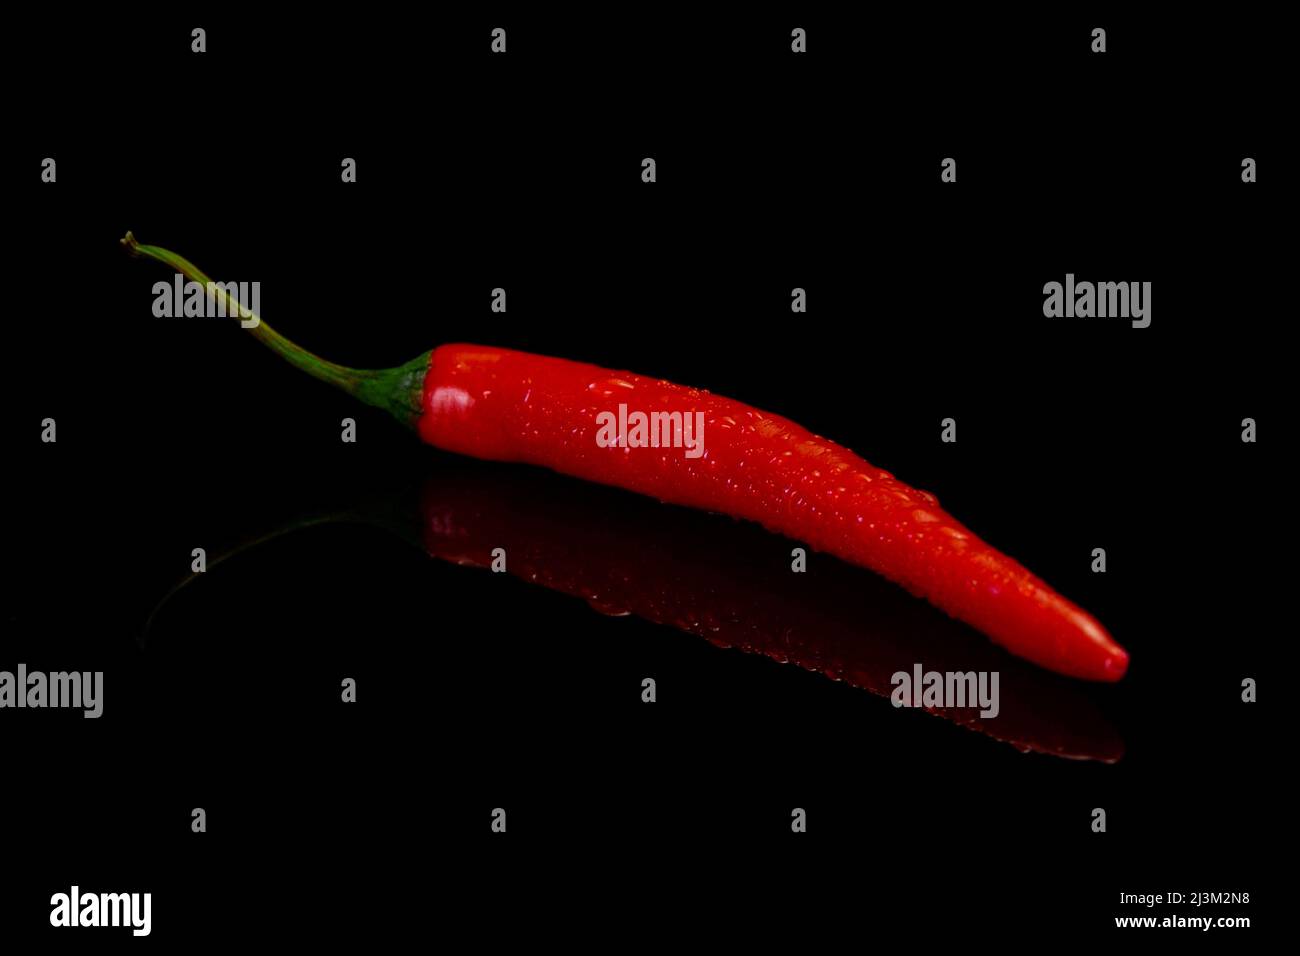 Chilli peppers on a black background. Fresh red hot chilli pepper. Stock Photo